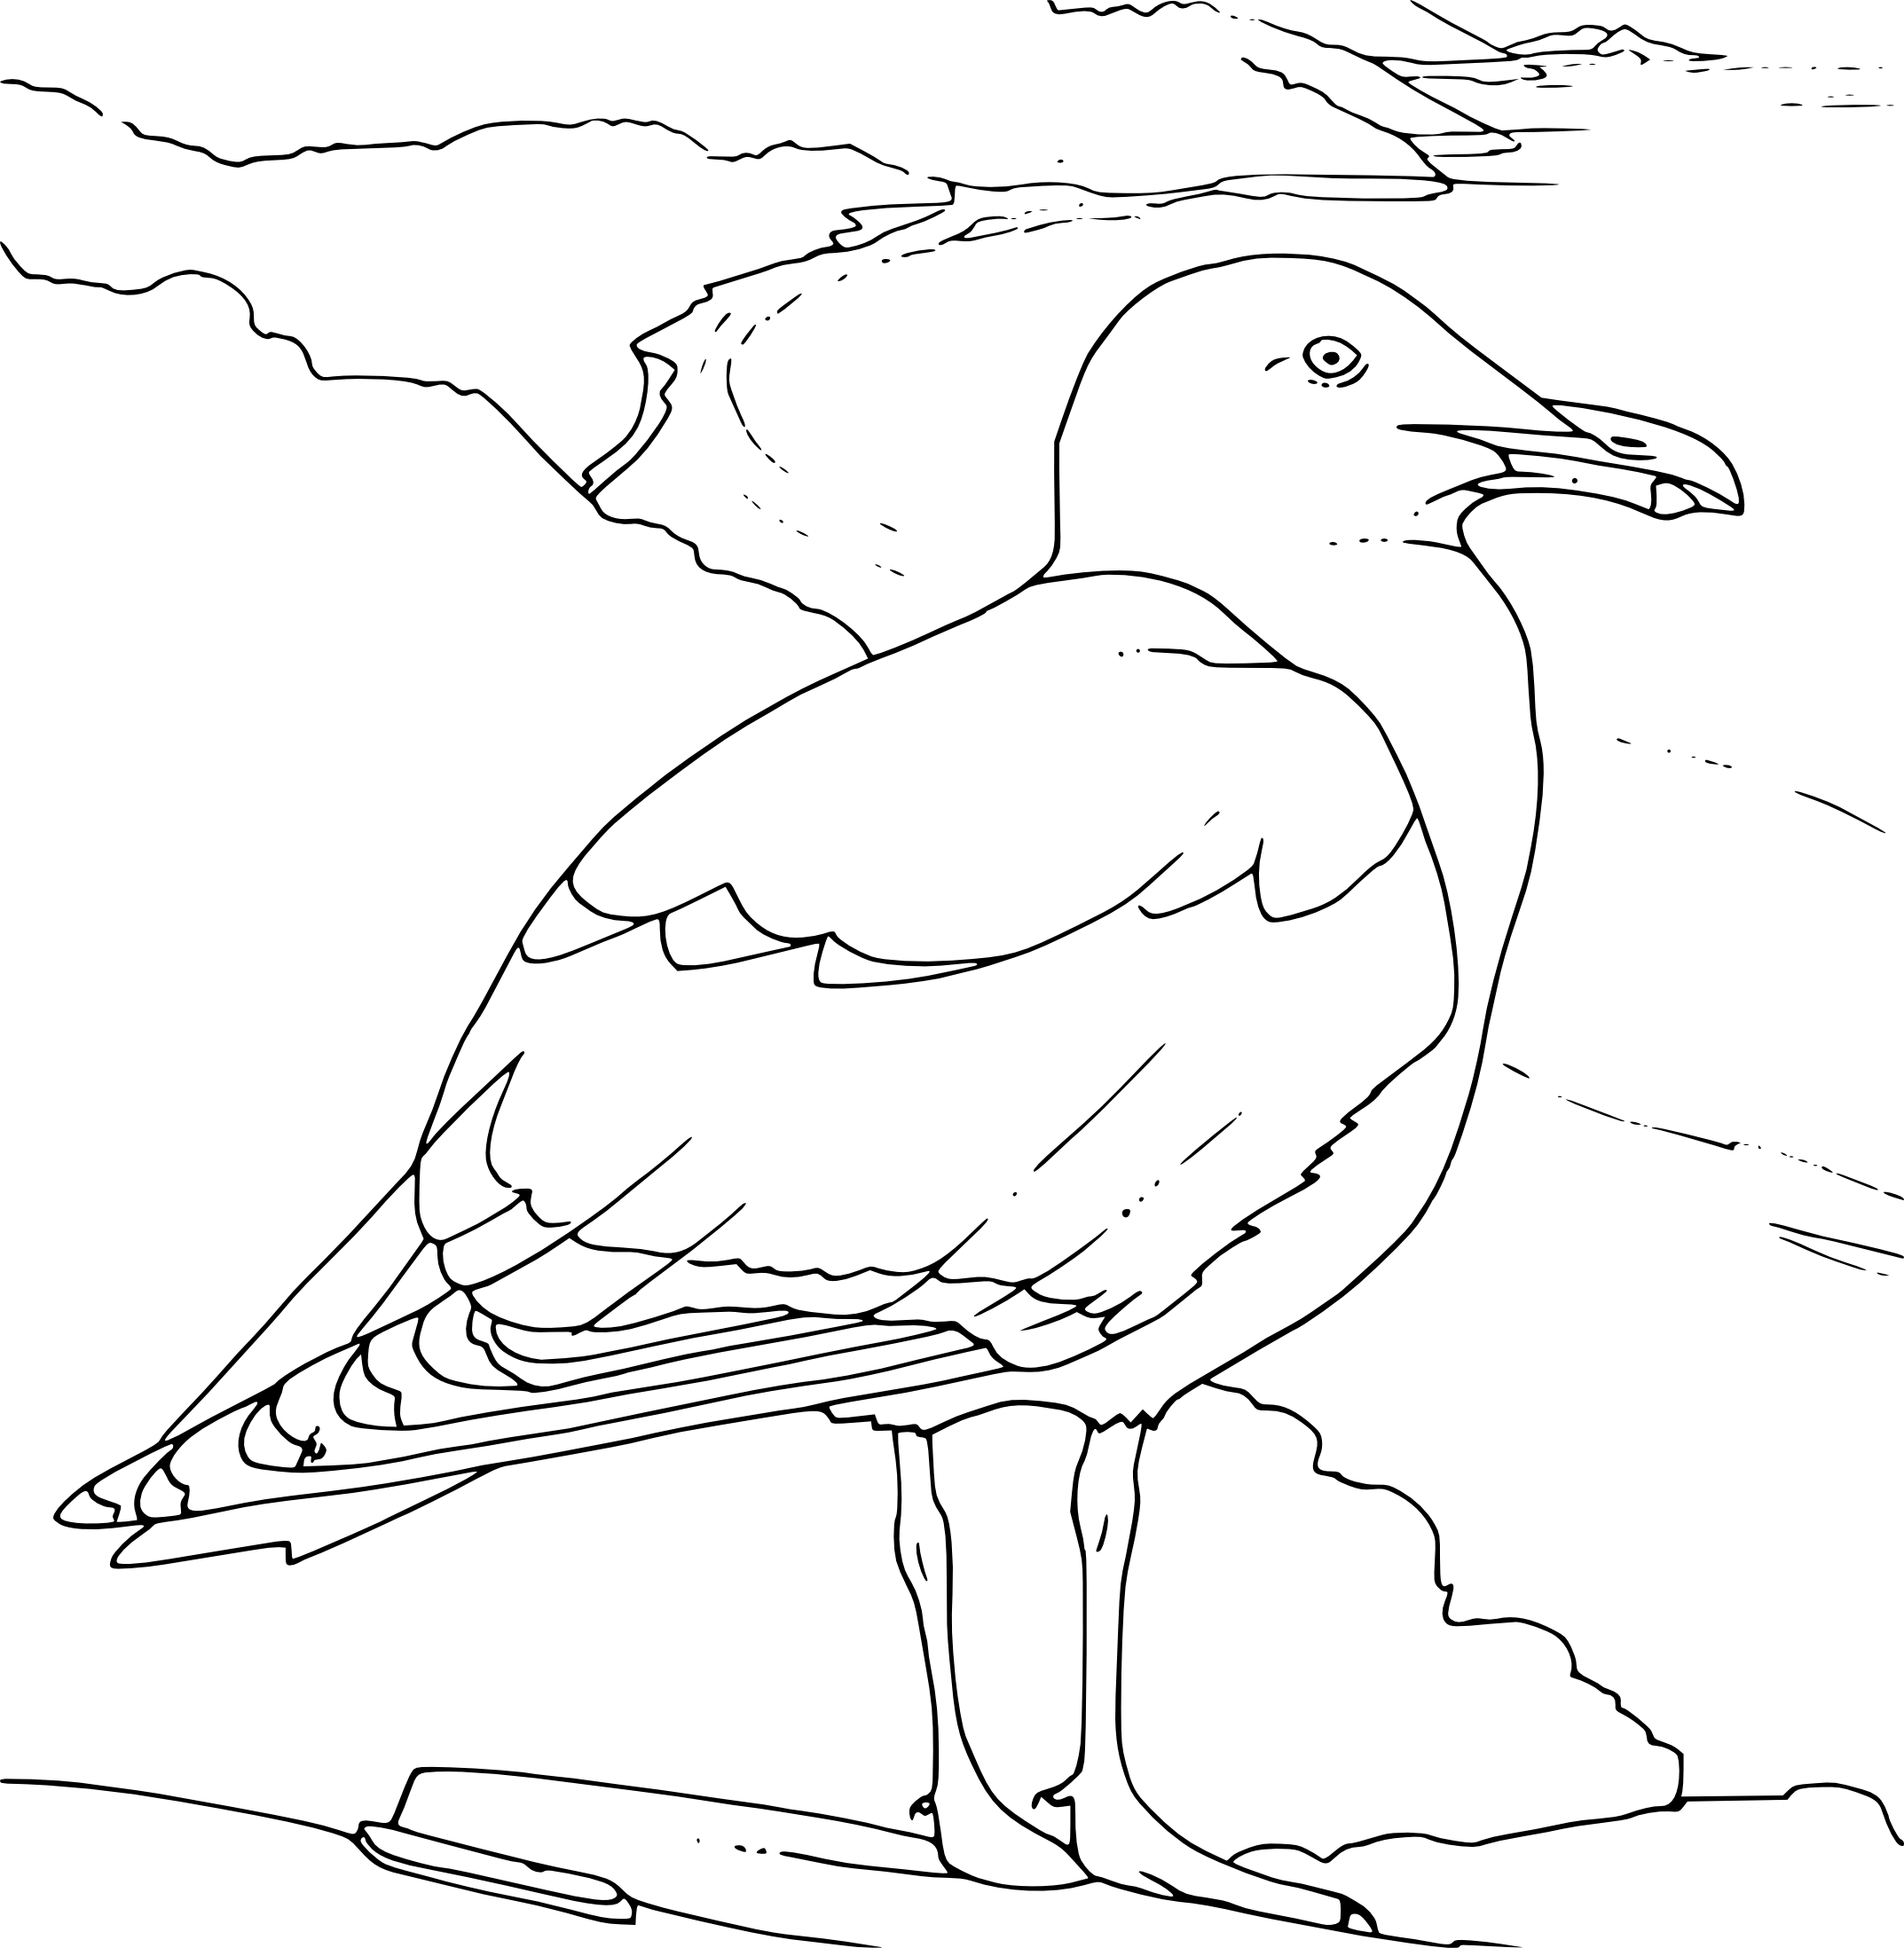 Gull coloring page